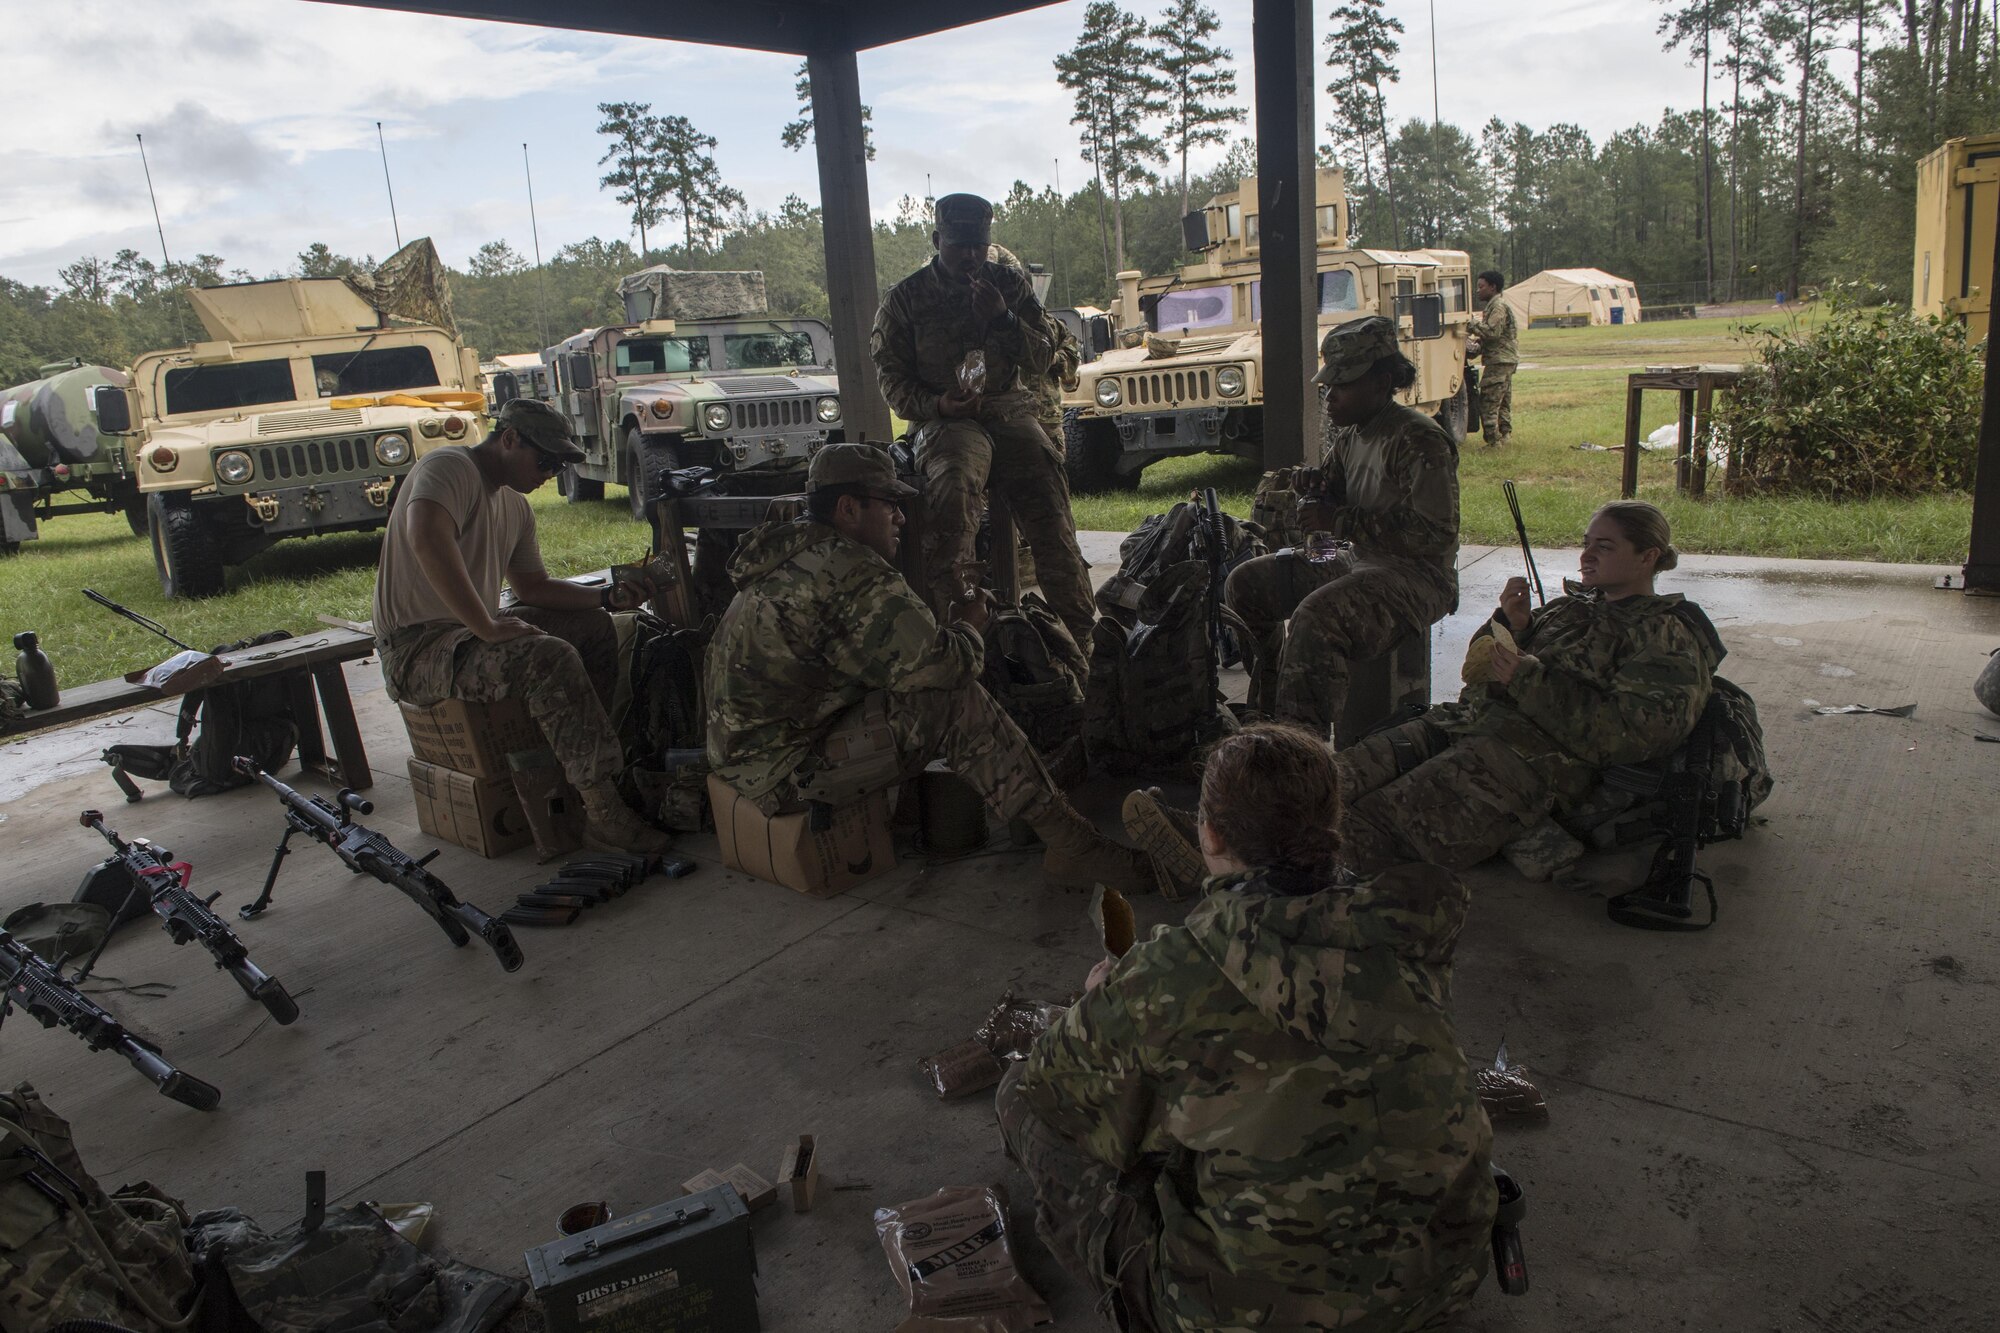 Airmen from the 823d Base Defense Squadron enjoy lunch during a mission readiness exercise, Oct. 23, 2017, at Moody Air Force Base, Ga. The 820th Base Defense Group tested the 823d BDS’s ability to operate in an austere environment with challenging scenarios that tested their capabilities and effectiveness. (U.S. Air Force Senior Airman Janiqua P. Robinson)